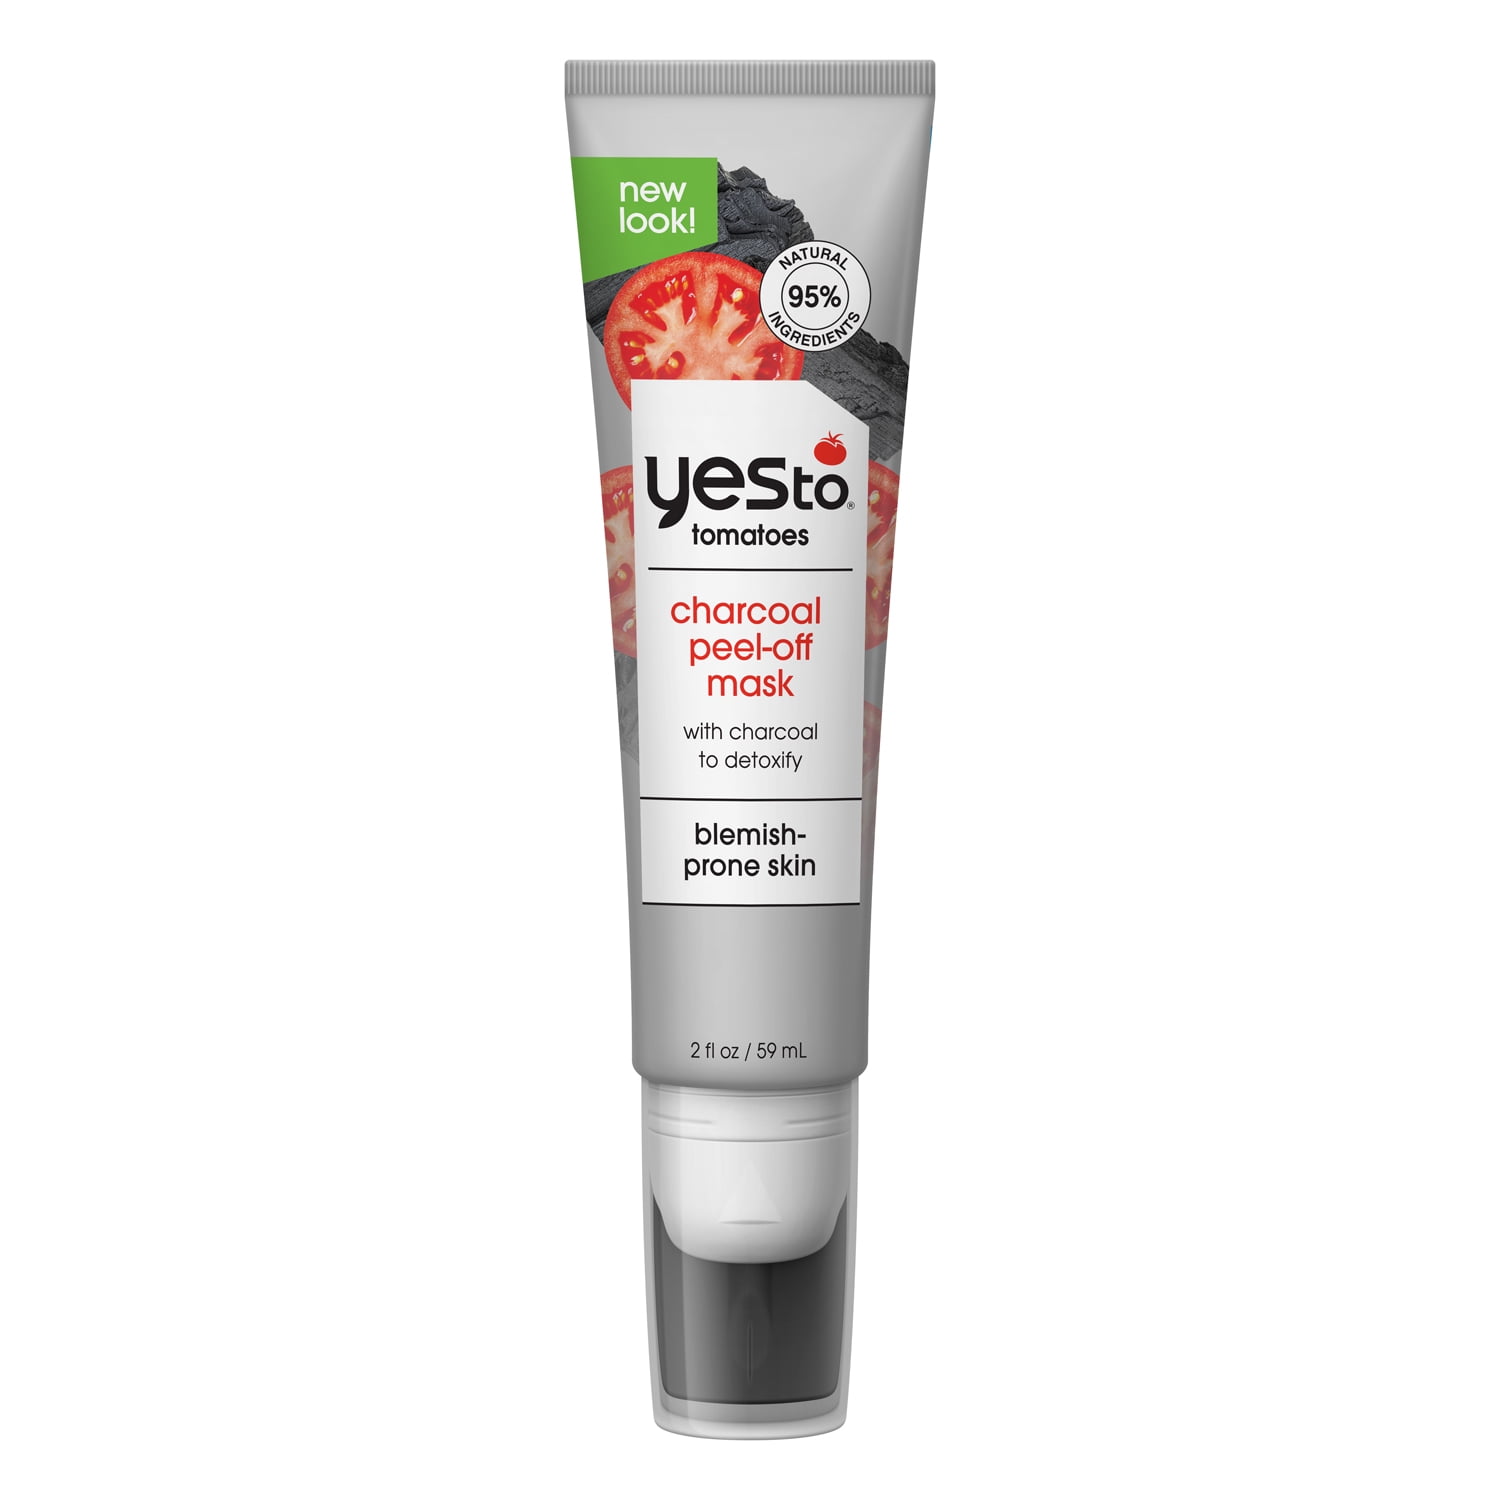 Yes to Tomatoes Clear Skin Detoxifying Charcoal DIY Powder-To-Paste Mask, 1  oz - Nationwide Campus